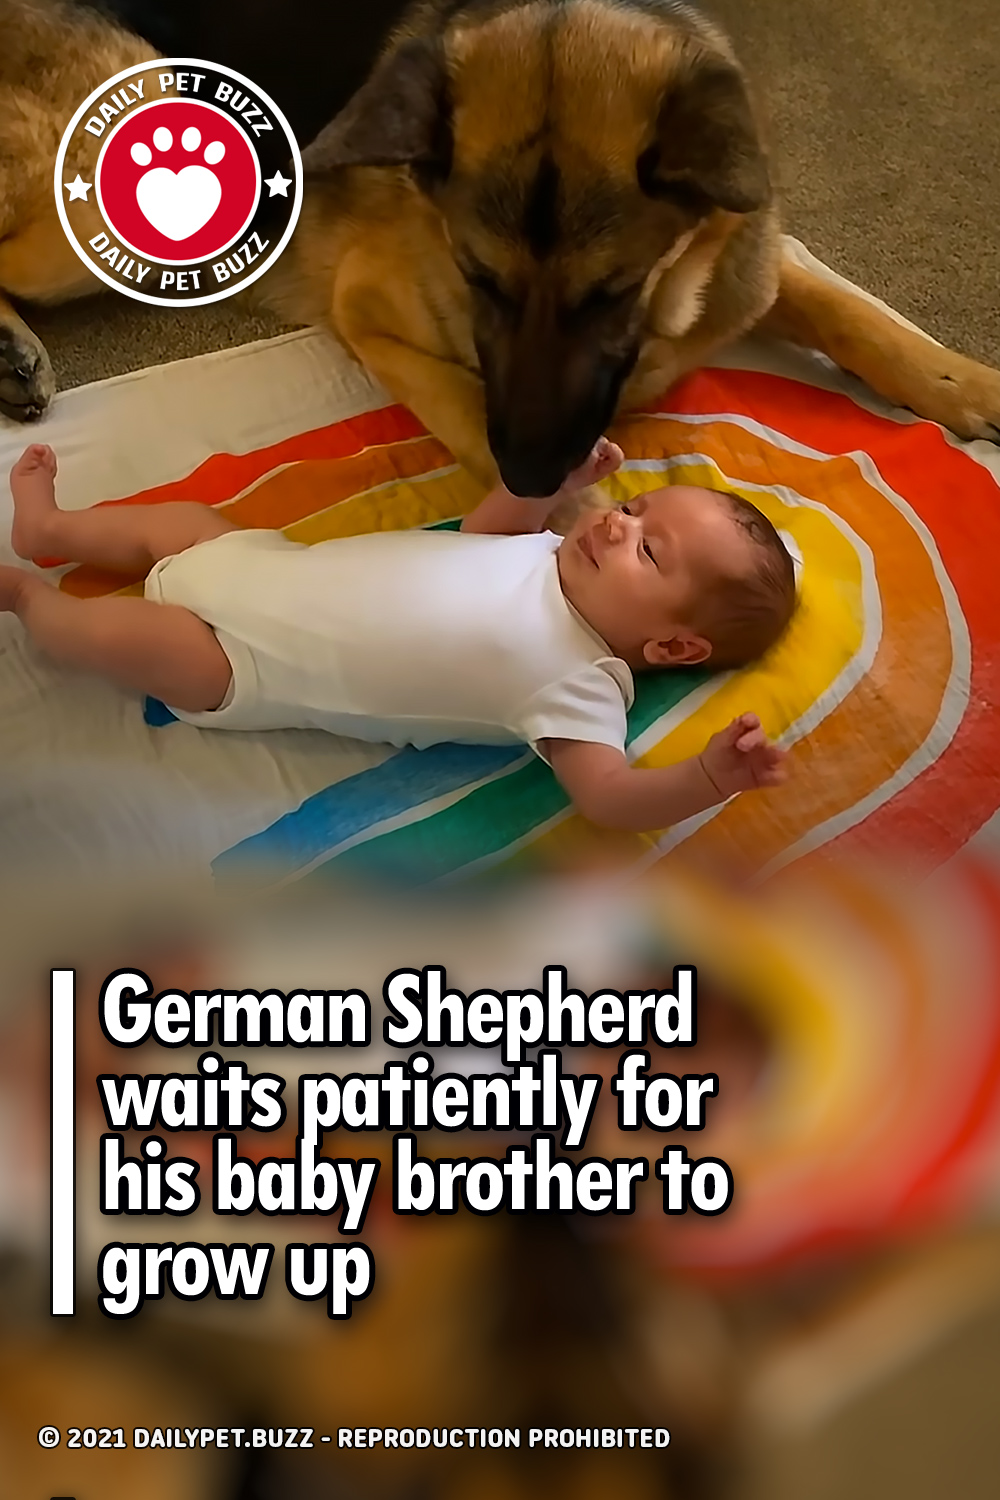 German Shepherd waits patiently for his baby brother to grow up